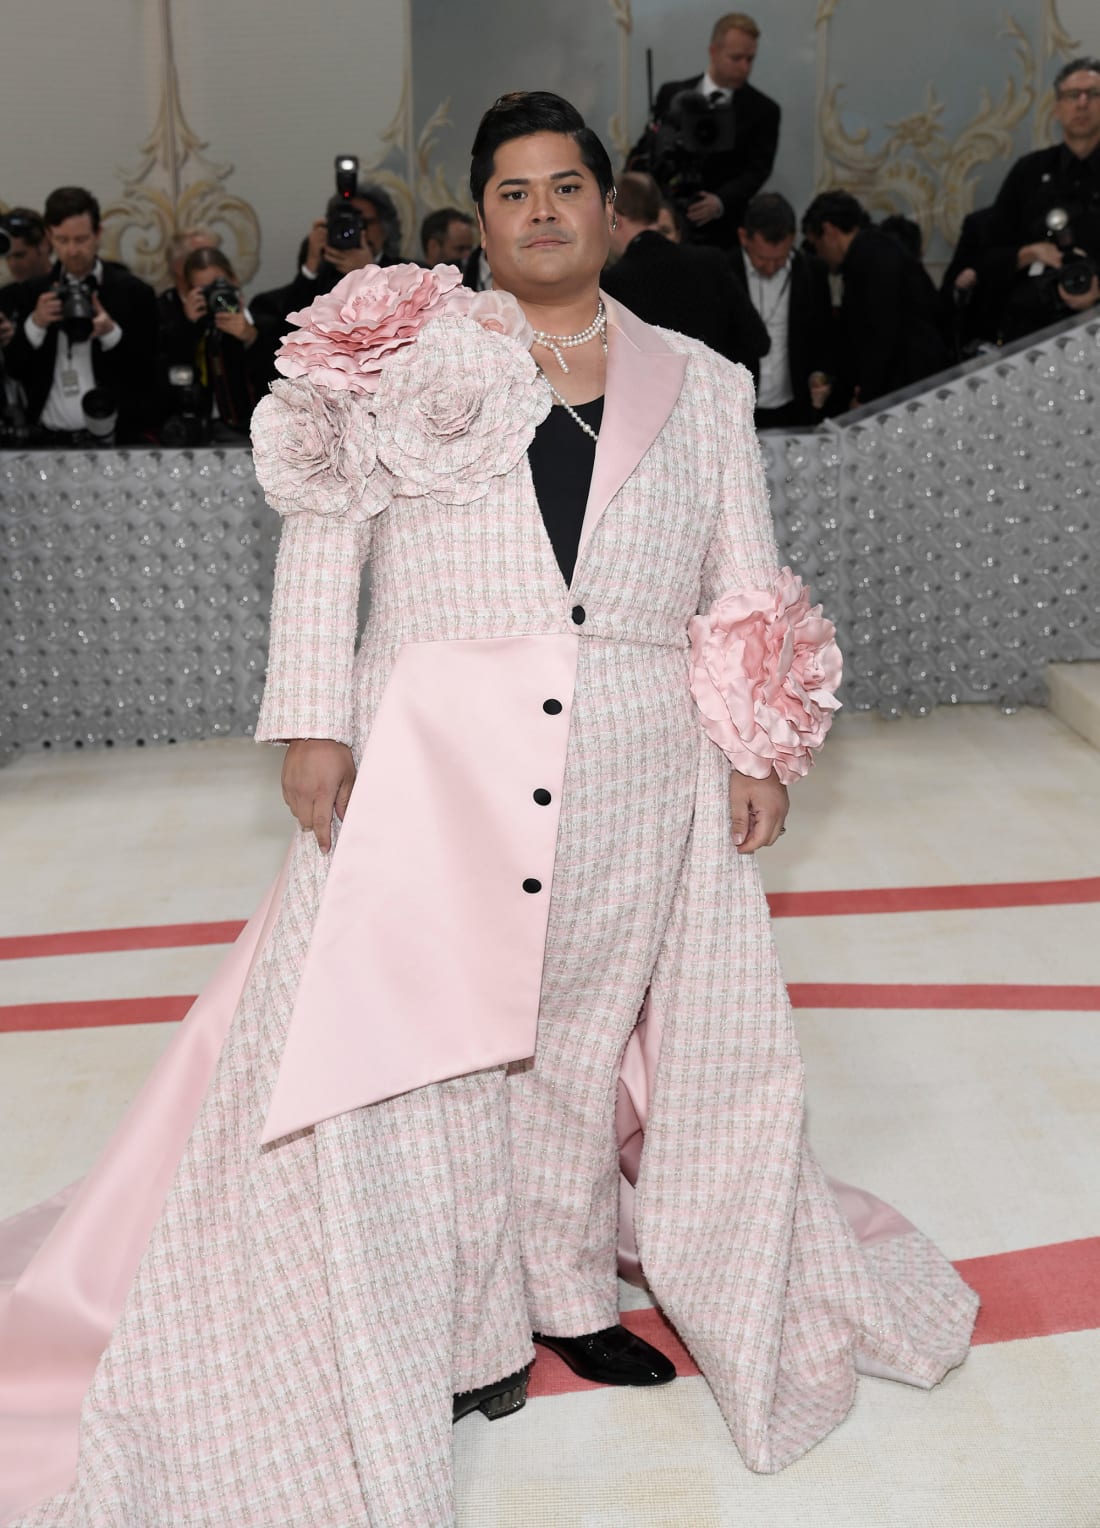 Actor Harvey Guillen set the tone early in a pink bustled jacket by Christian Siriano with oversized floral embellishments.